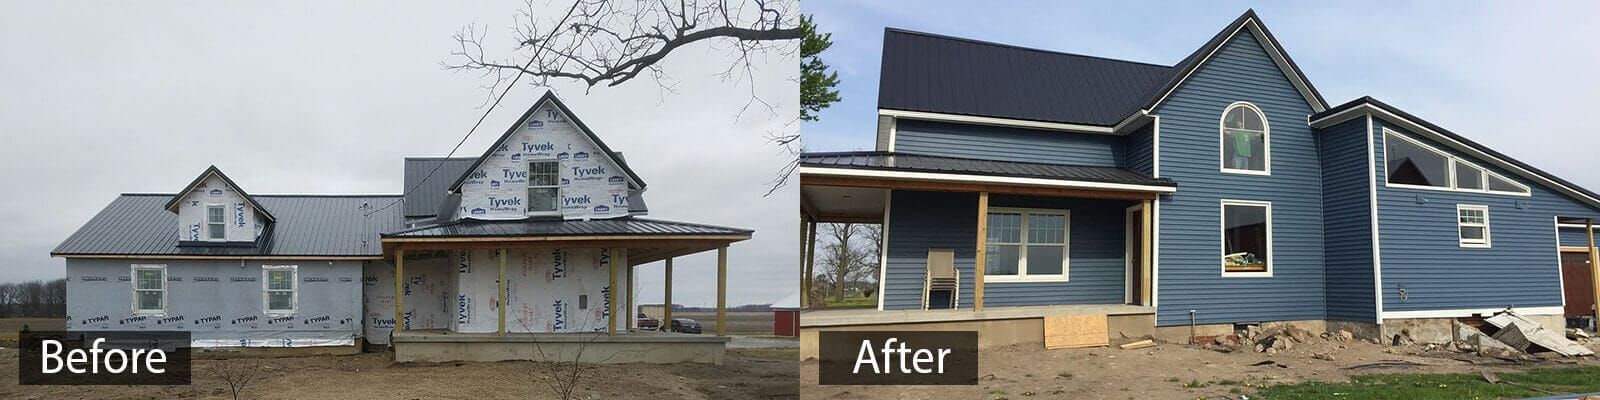 Scott before and after - South Bend, IN - A&M Home Services